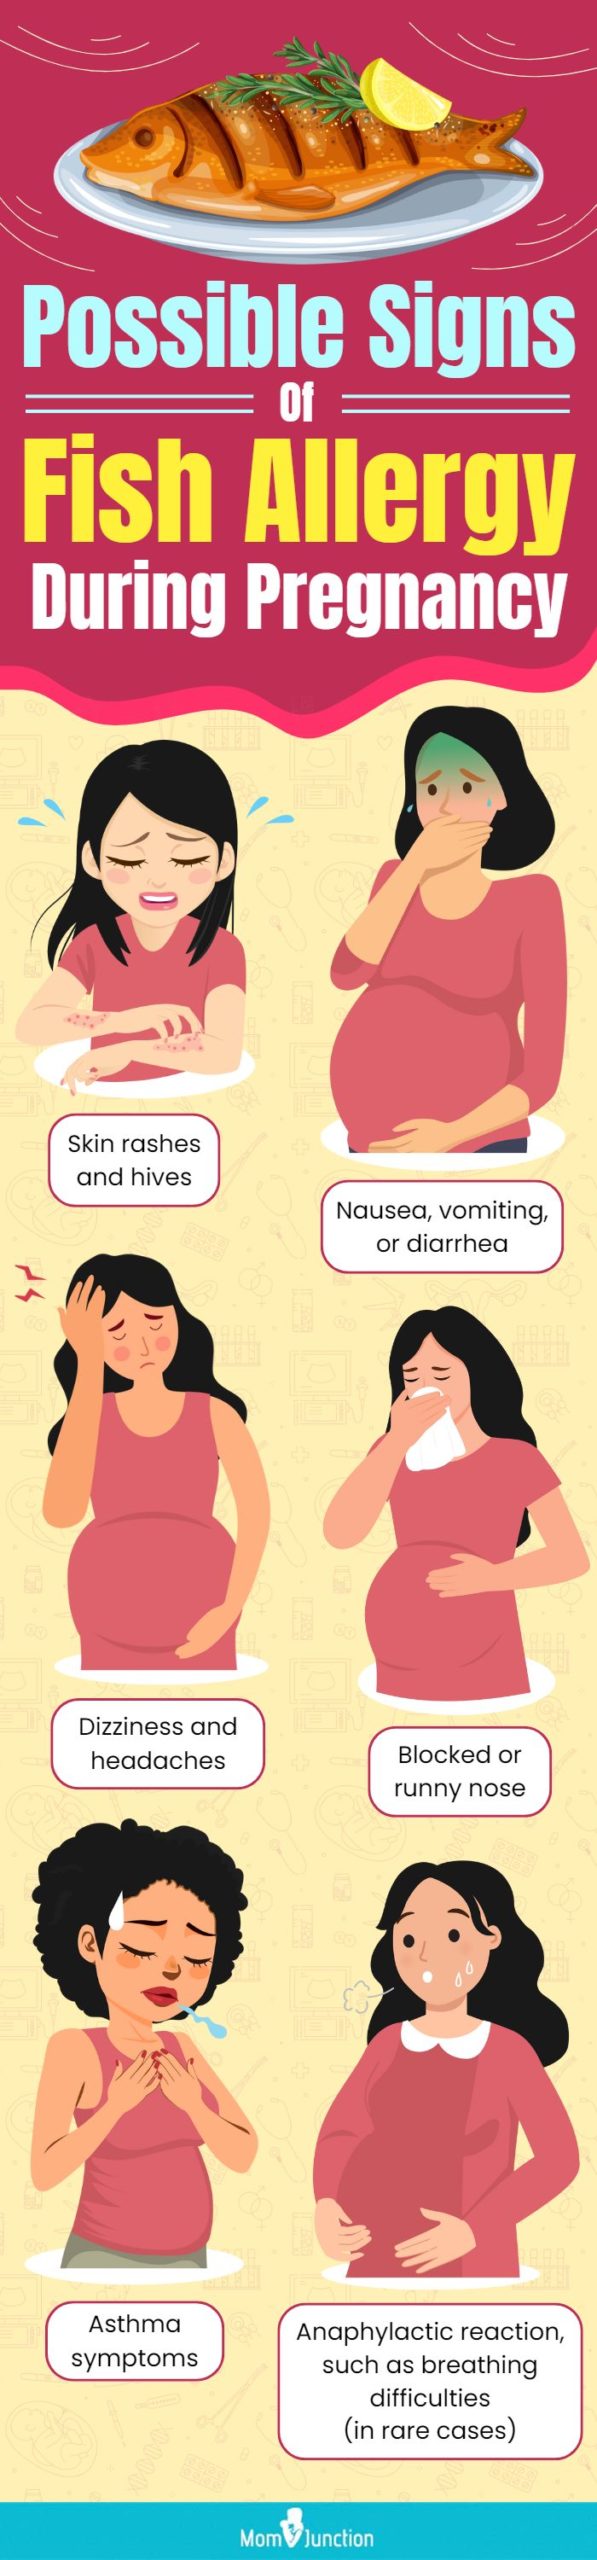 possible signs of fish allergy during pregnancy (infographic)